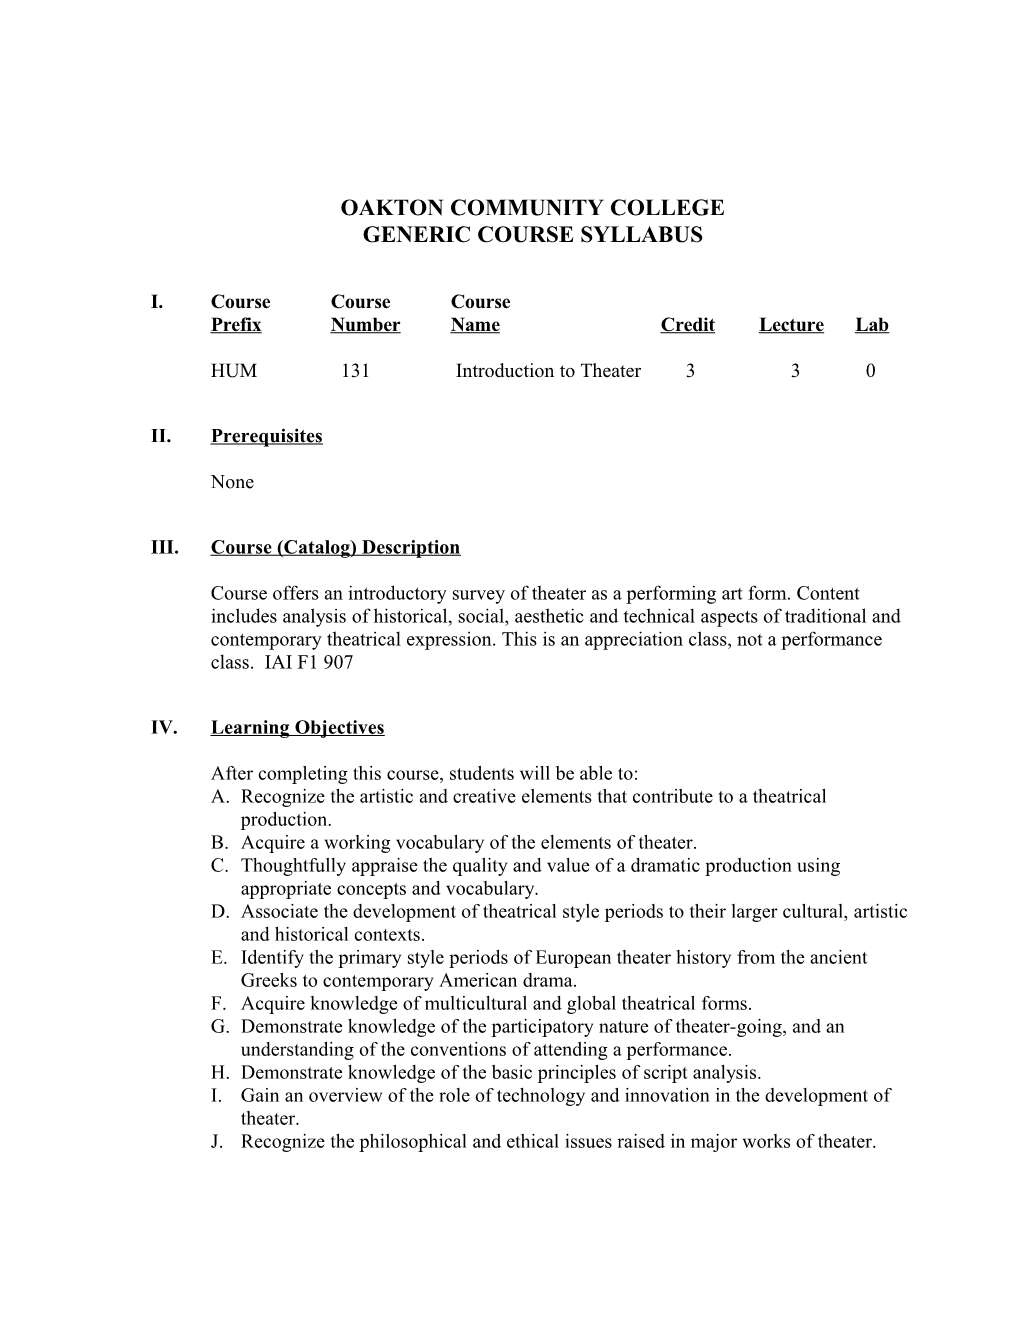 COURSE SYLLABUS (GENERIC)Page 1